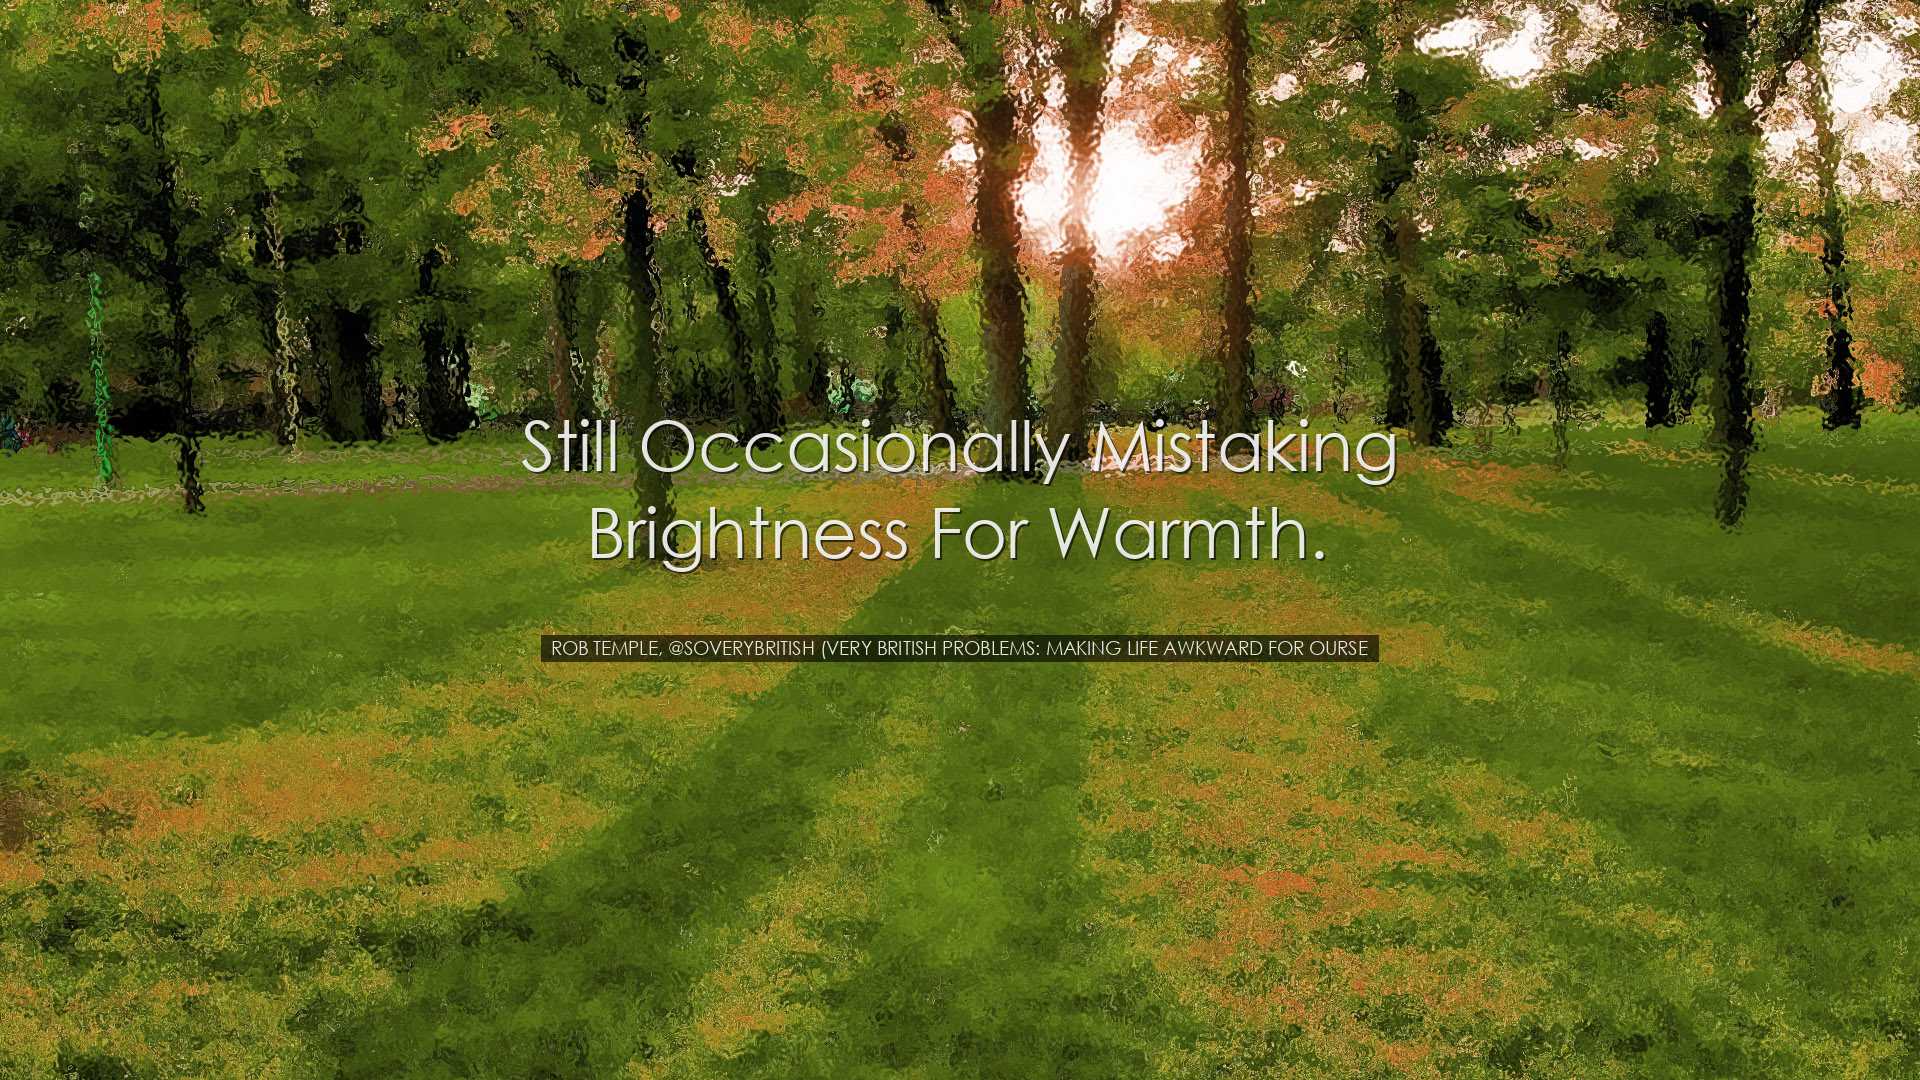 Still occasionally mistaking brightness for warmth. - Rob Temple,